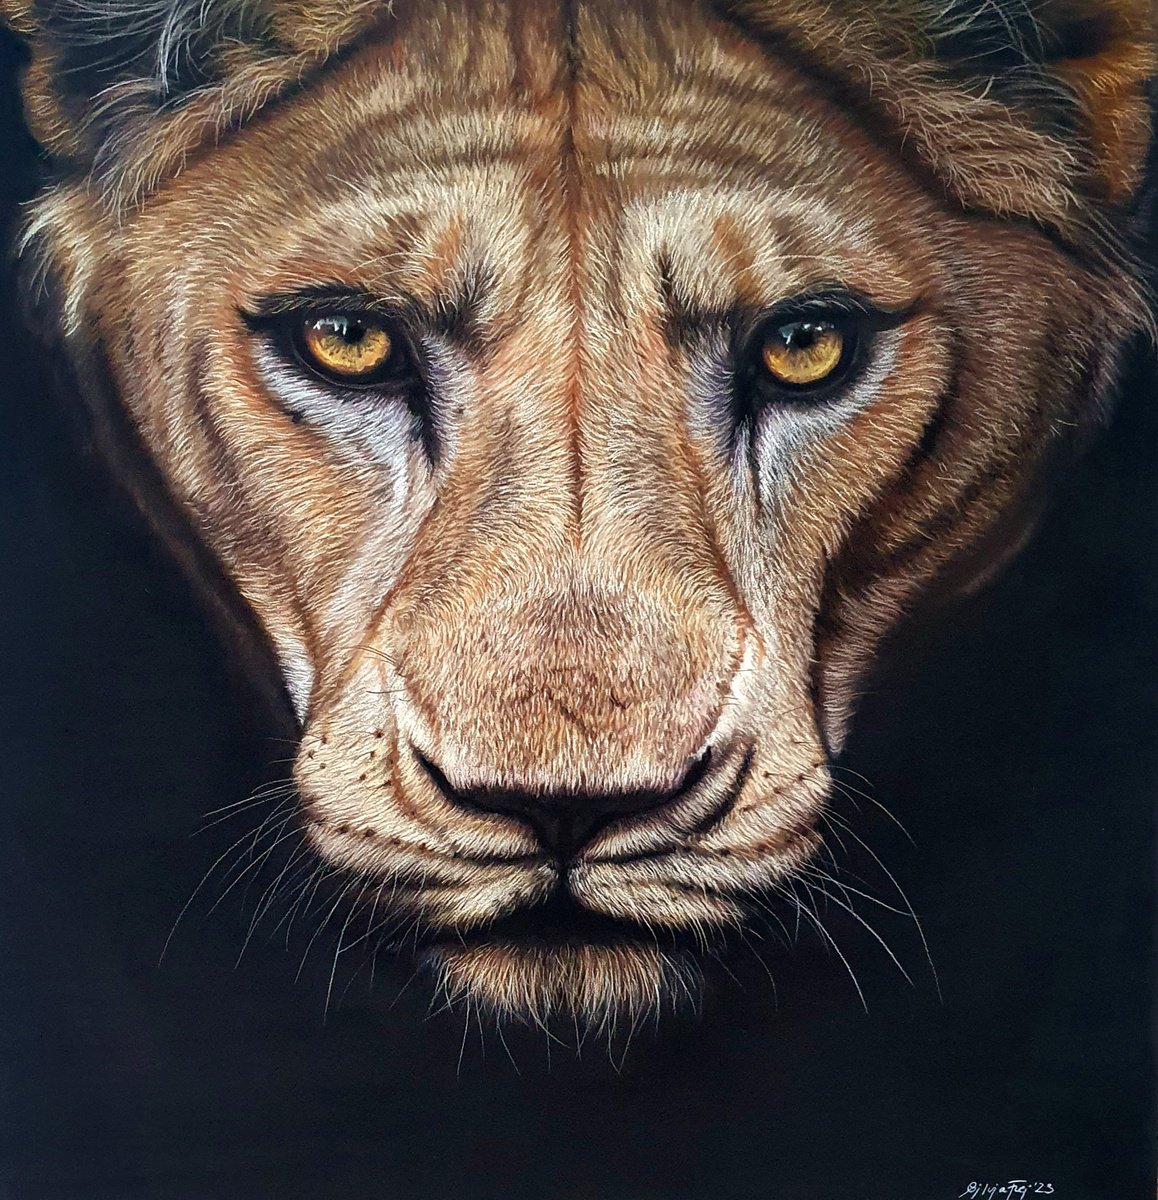 ’Huntress’ lioness pastel painting by Silvia Frei